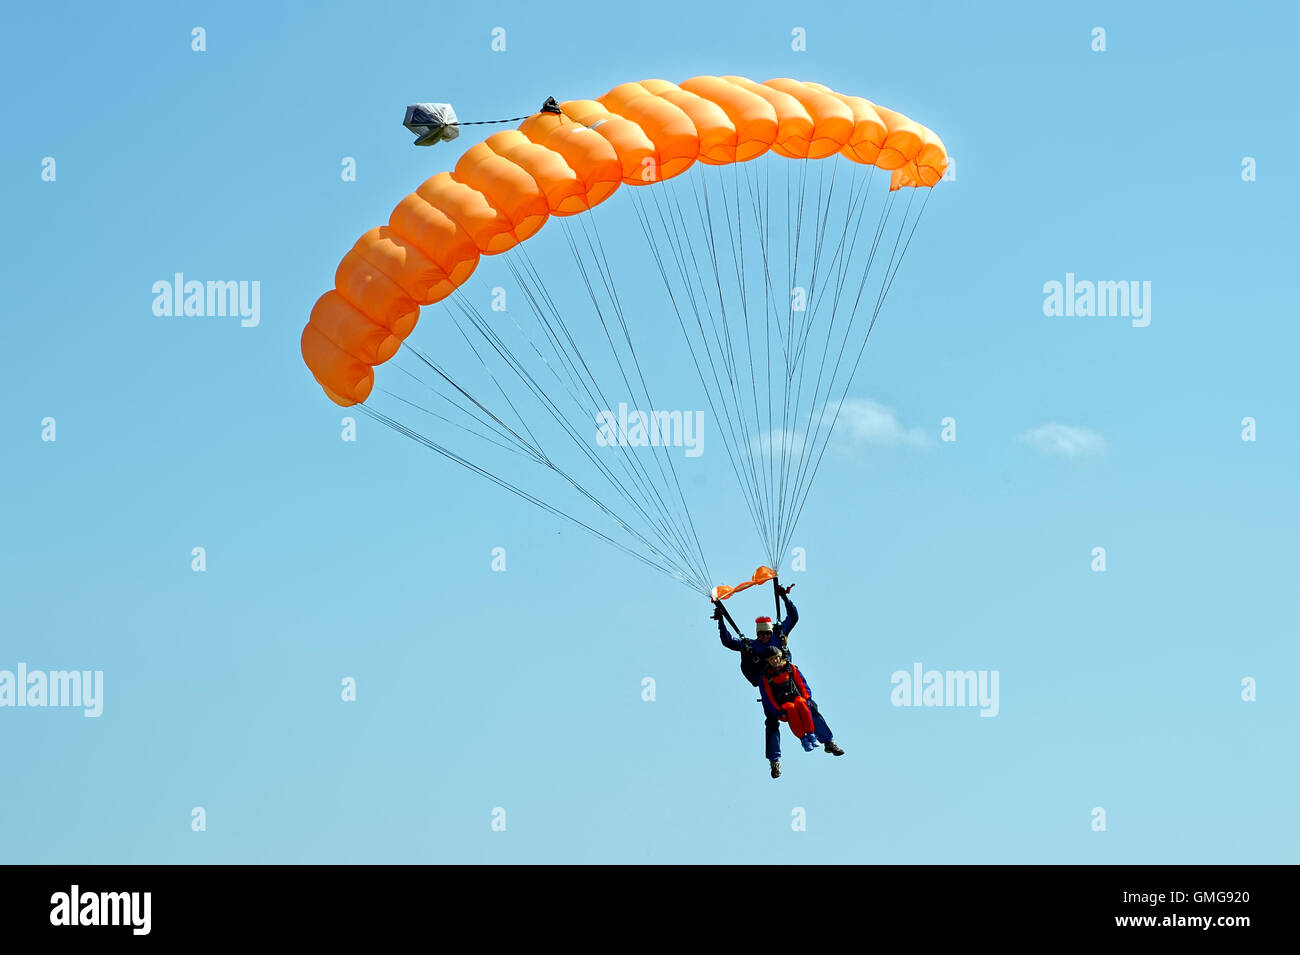 Paraglider flying on orange-colored parachute in blue clear sky at a bright sunny summer day. Active lifestyle, extreme hobbies Stock Photo